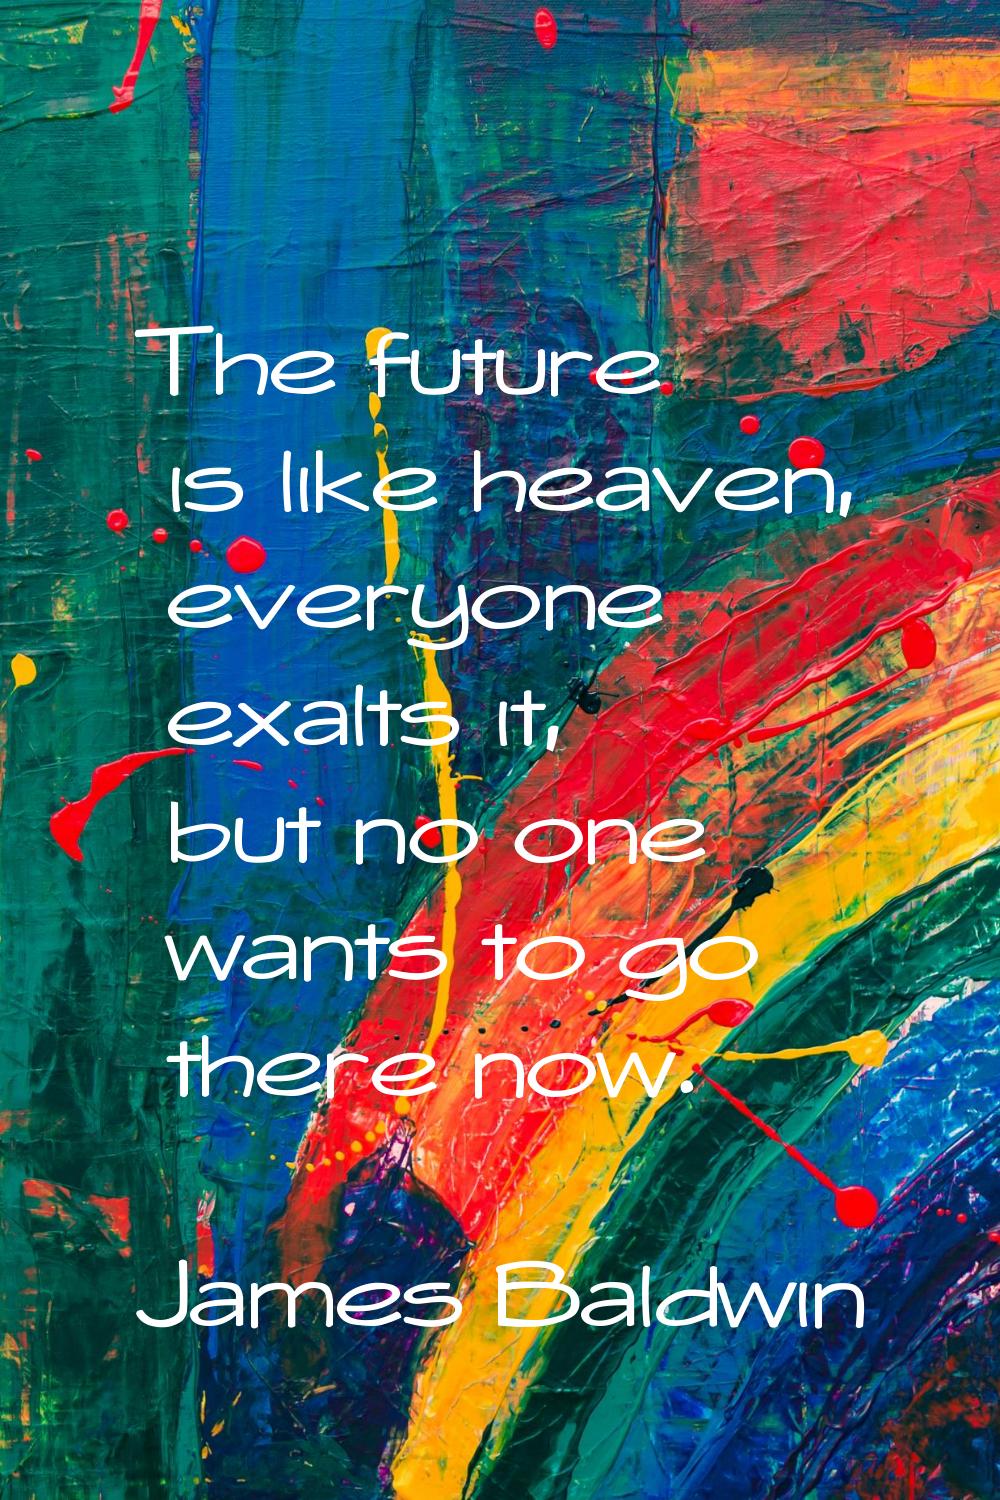 The future is like heaven, everyone exalts it, but no one wants to go there now.